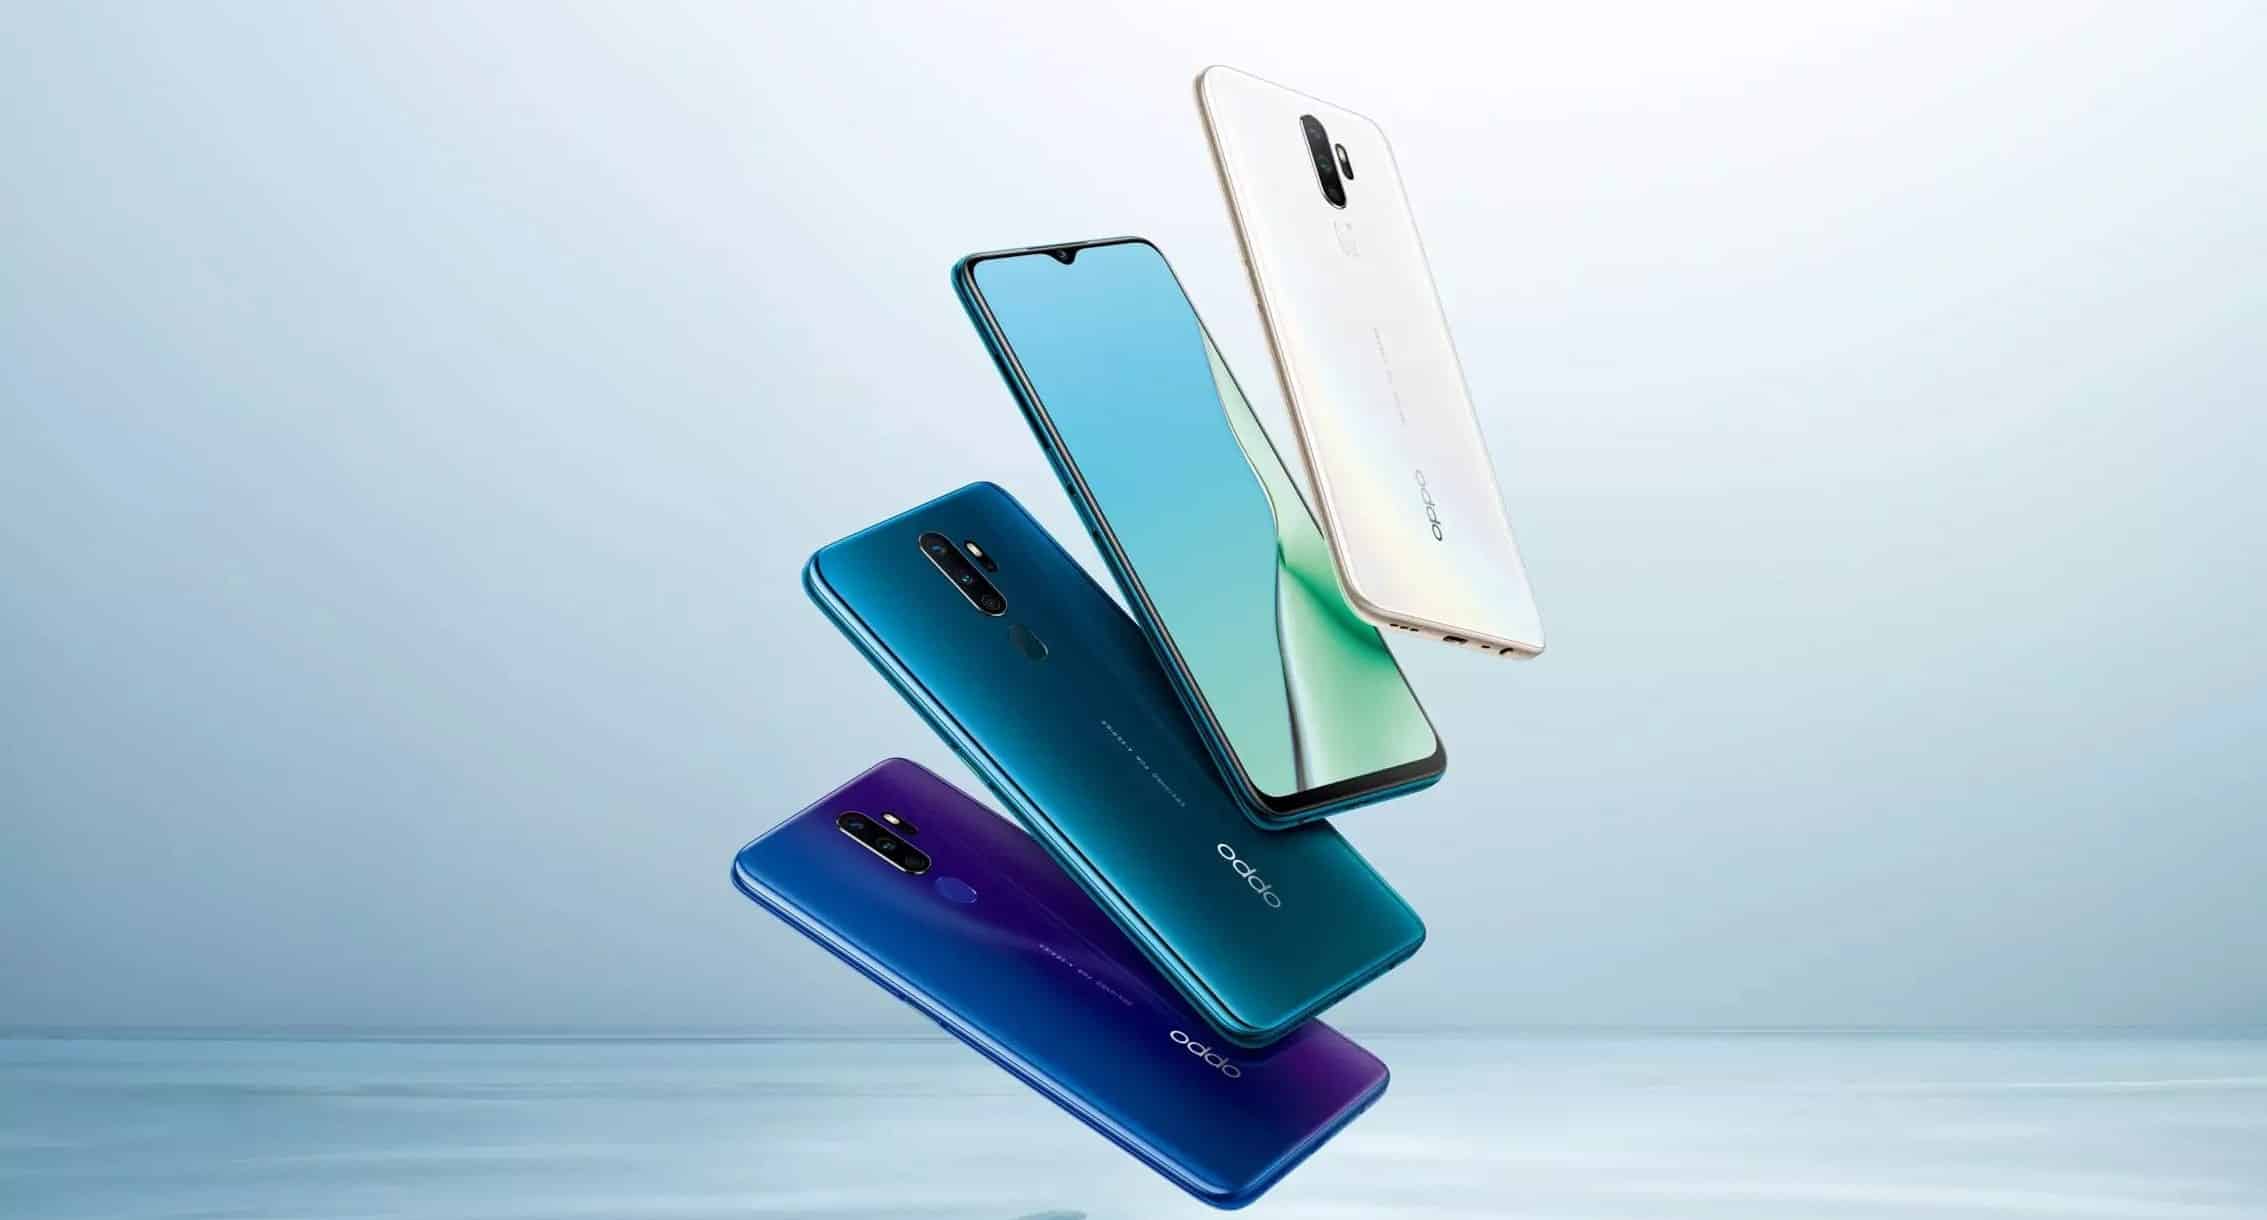 OPPO A11 unveiled in China with Quad-rear cameras and 5000mAh battery